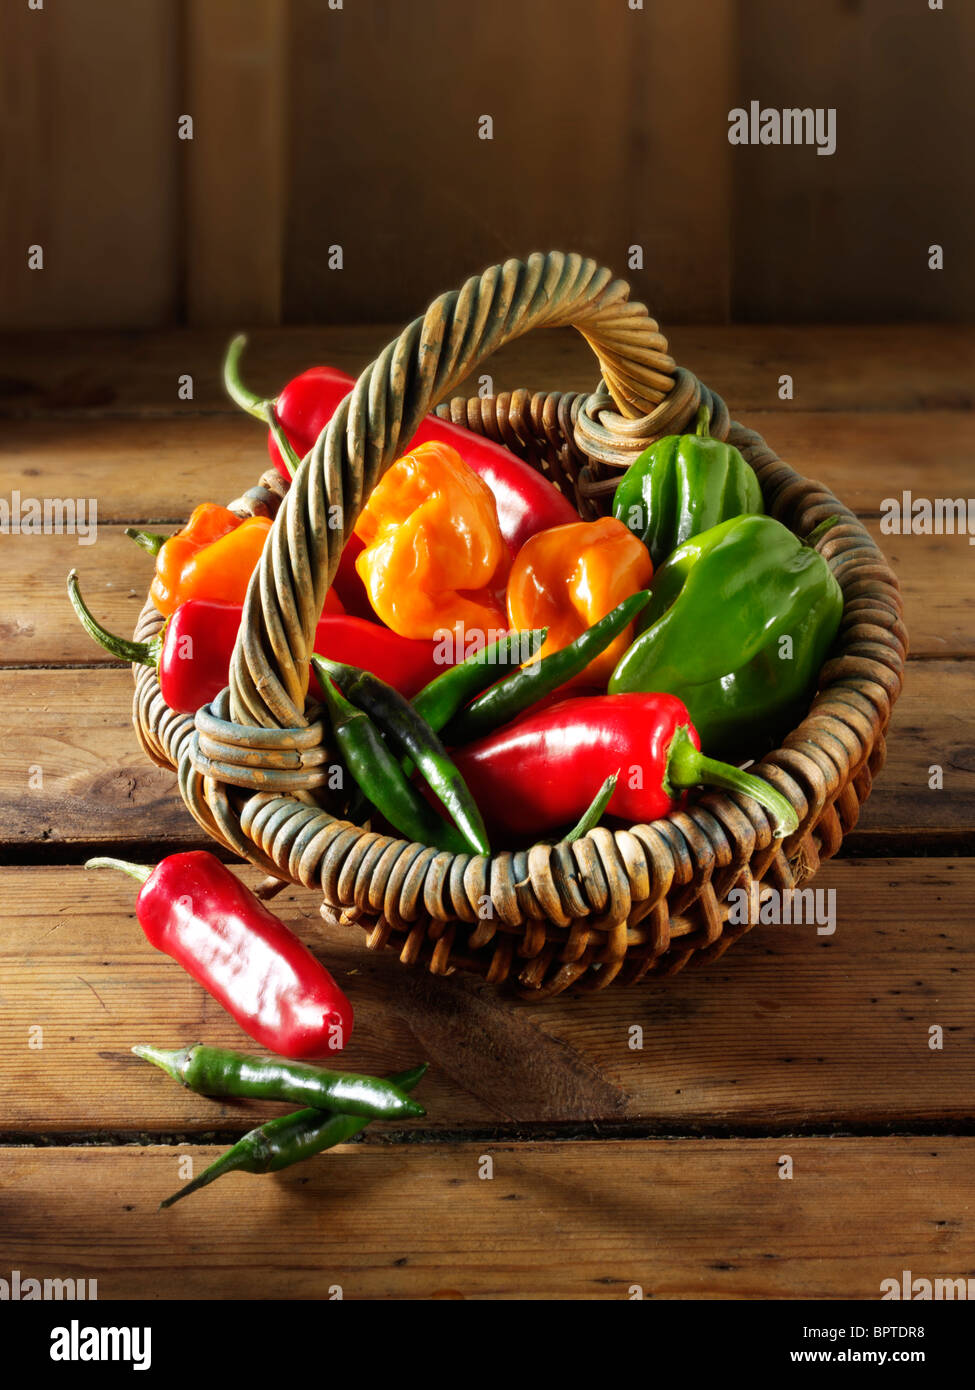 Mixed fresh chiilies (chilies) in a basket against a wood background Stock Photo